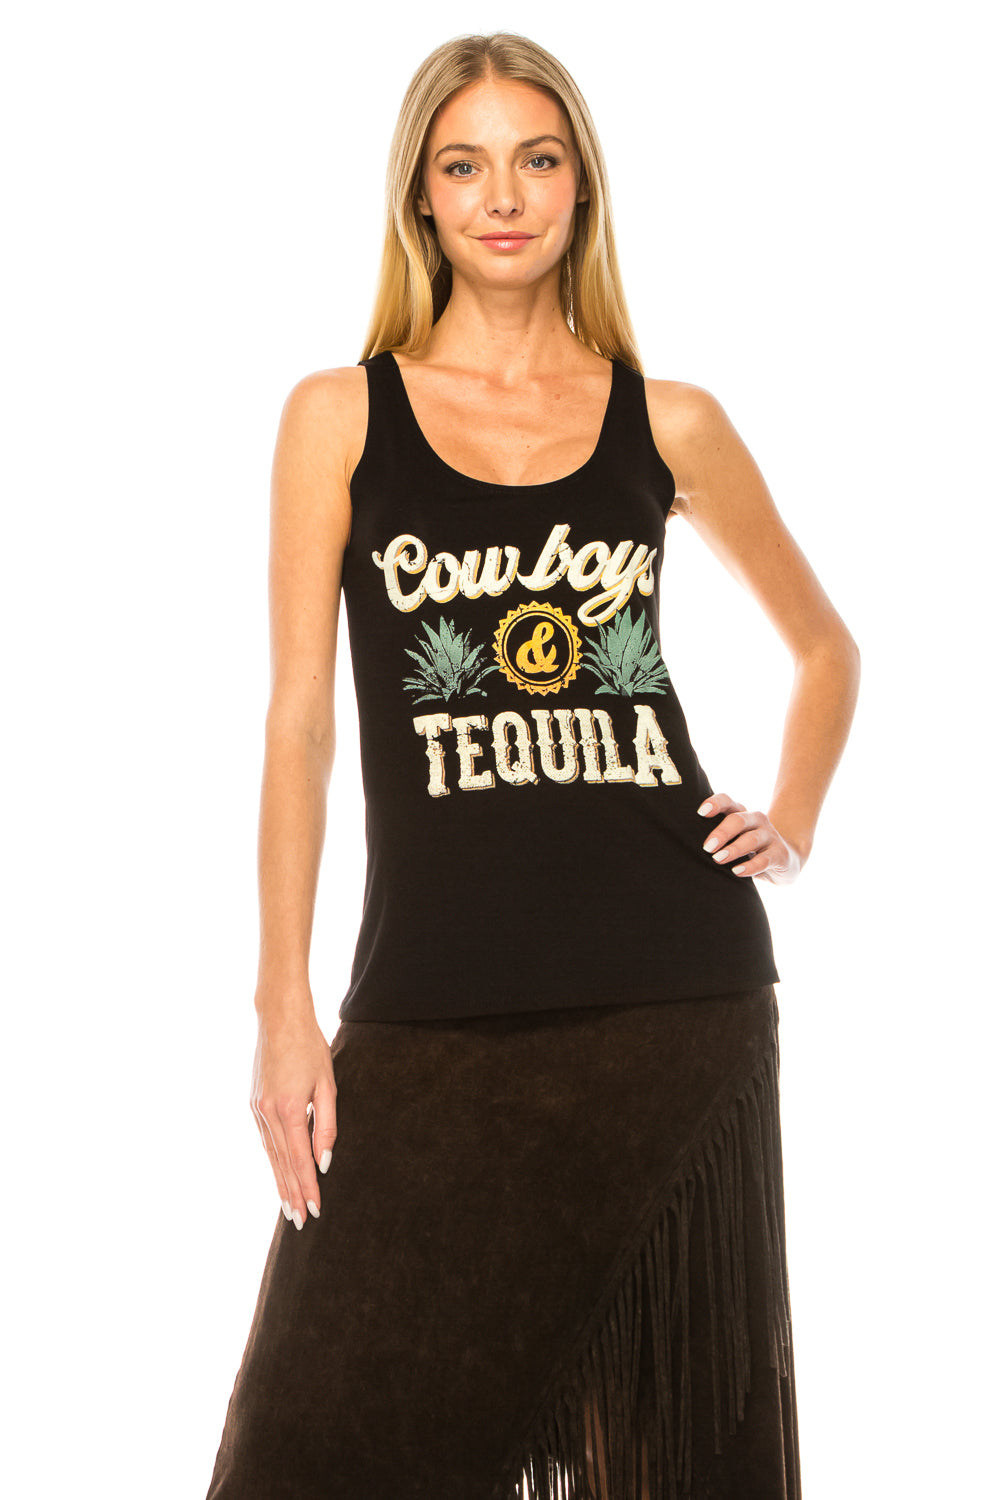 COWBOYS AND TEQUILA TANK TOP - Trailsclothing.com